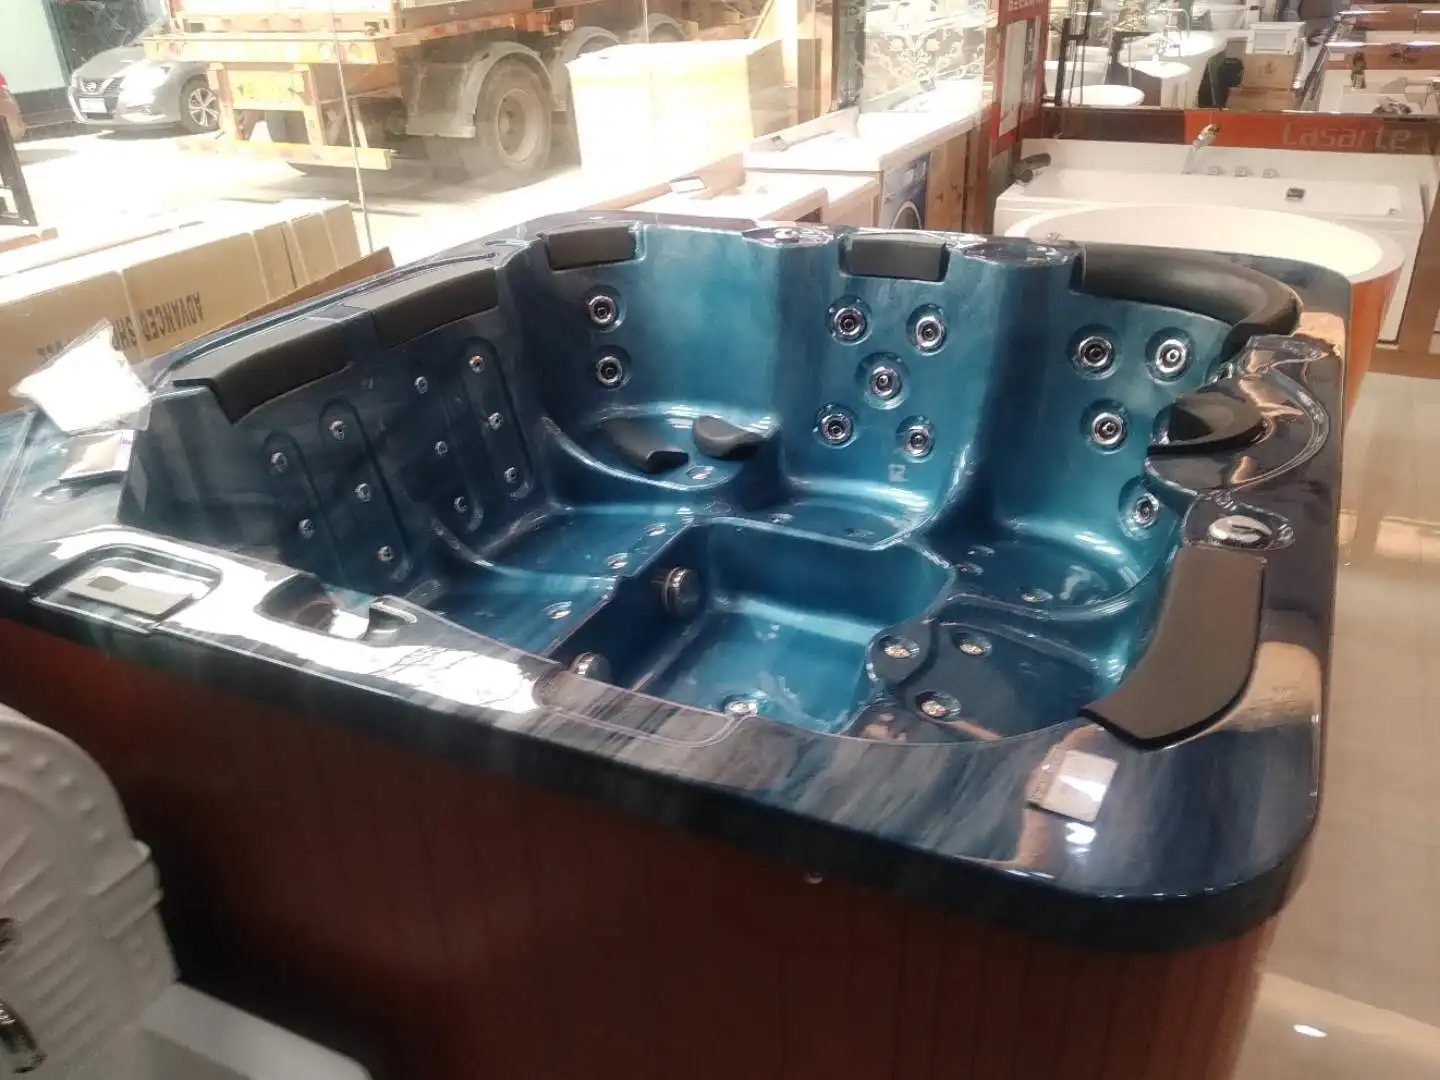 hottub outdoor spa with jacuzzi 6 person spa exterior yacuzzi jaquzzi hottub outdoor spa